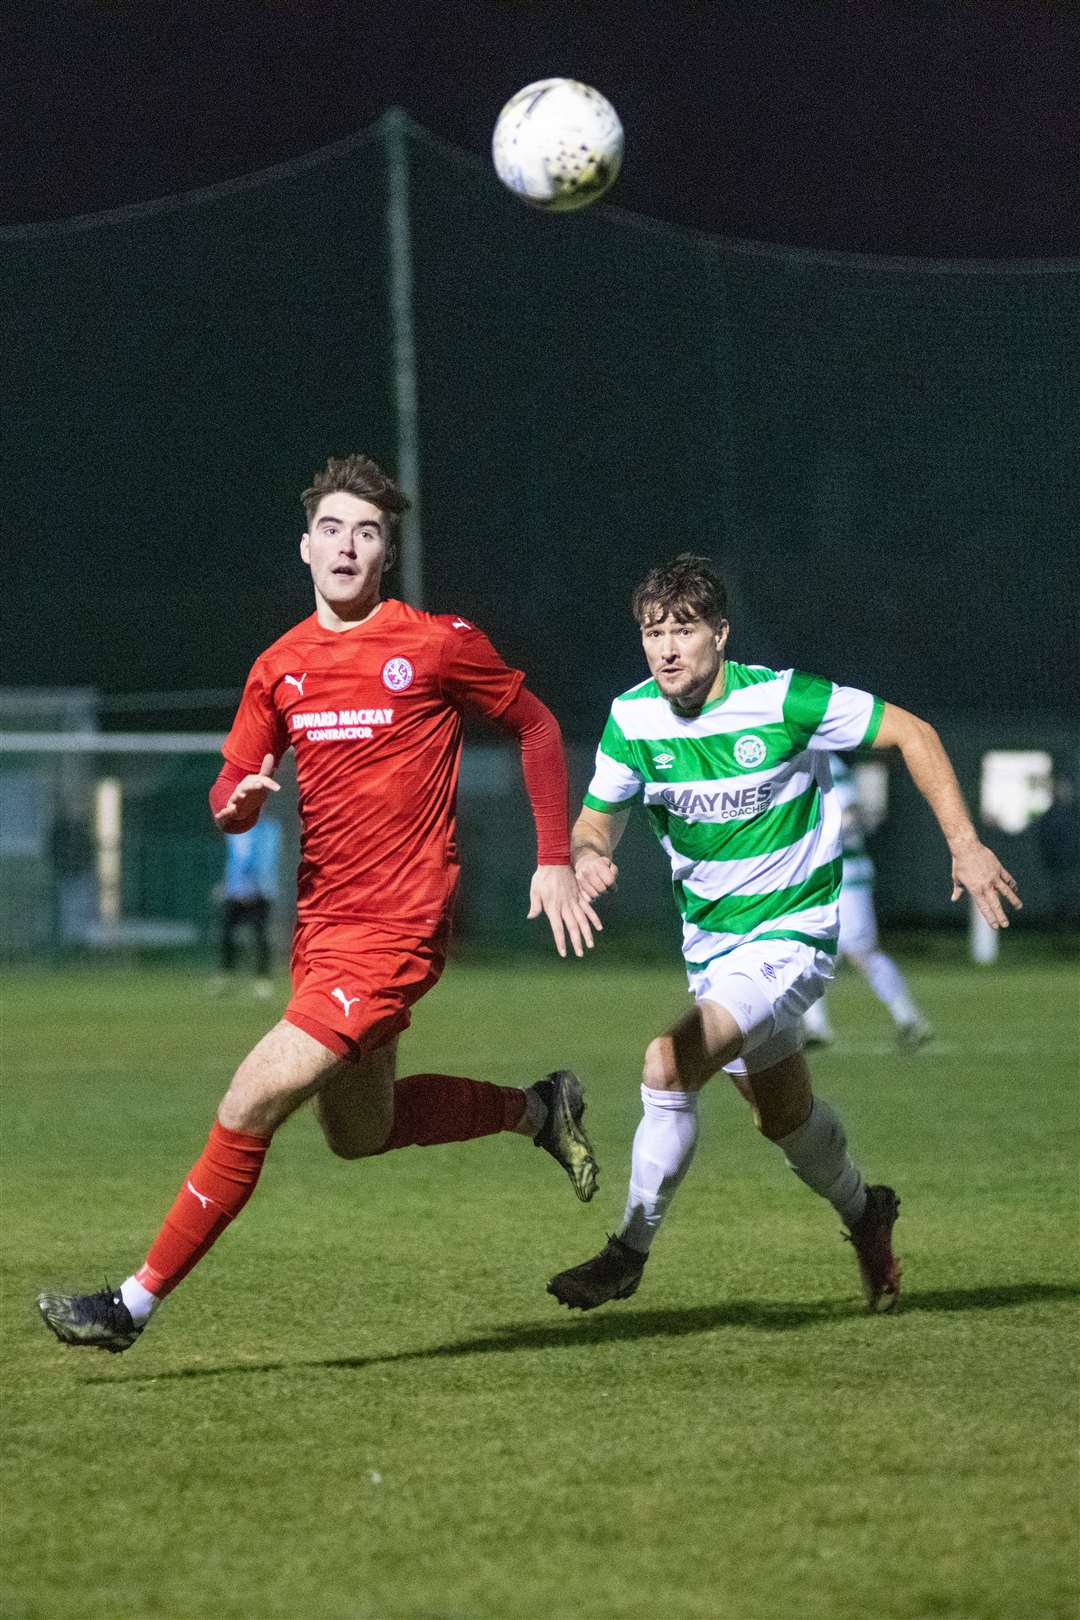 Brora Rangers' Max Ewan (left) and Buckie Thistle's Sam Urquhart (right) chase down the ball...Buckie Thistle FC (5) vs Brora Rangers FC (0) - Highland Football League - Victoria Park, Buckie 16/02/2022...Picture: Daniel Forsyth..